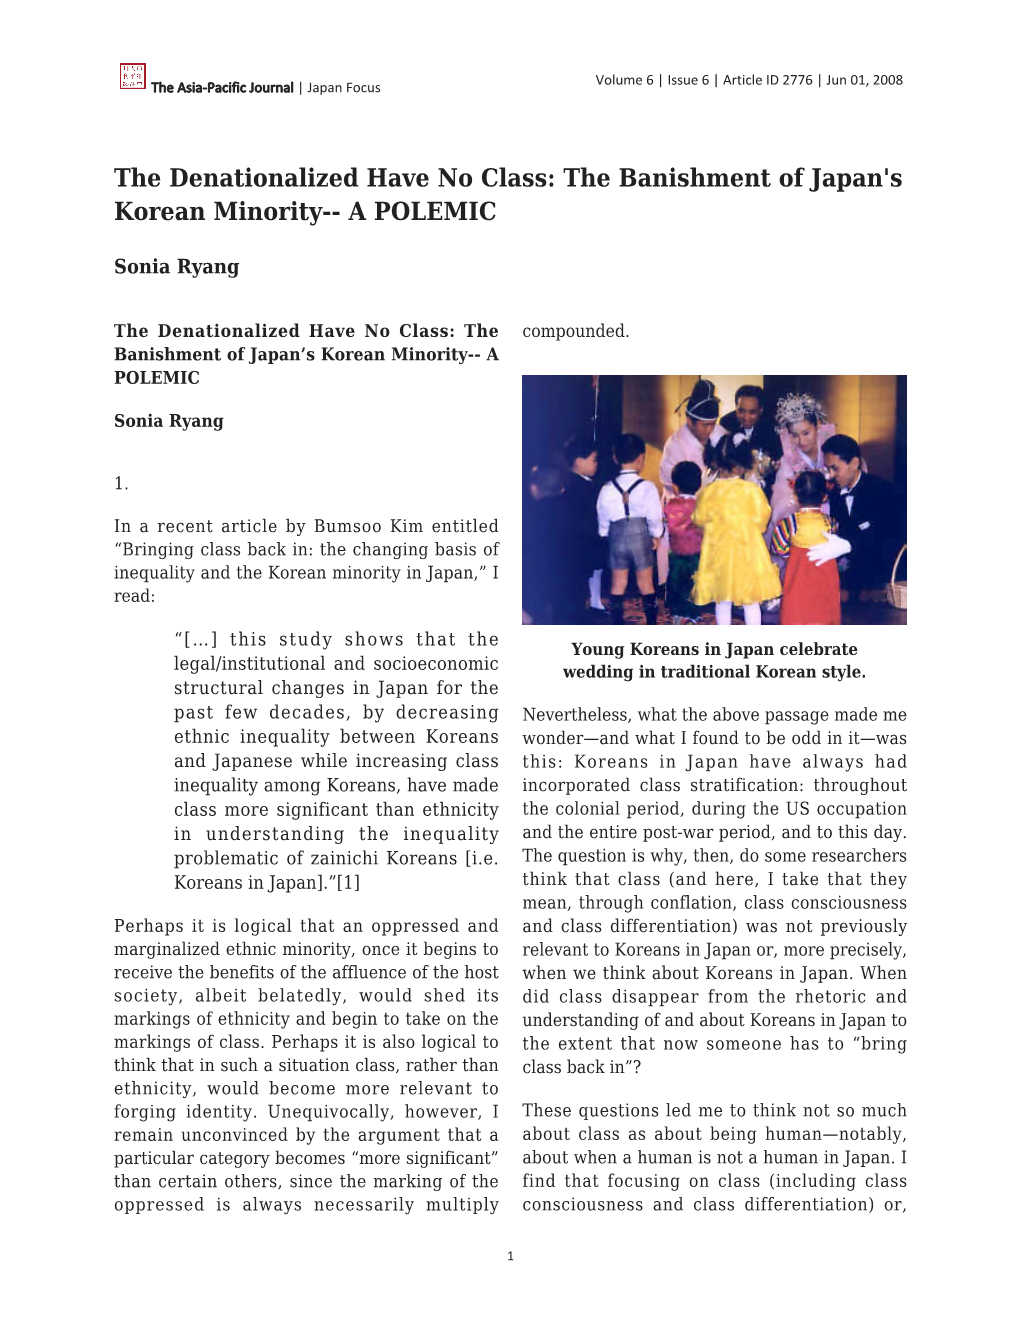 The Denationalized Have No Class: the Banishment of Japan's Korean Minority-- a POLEMIC